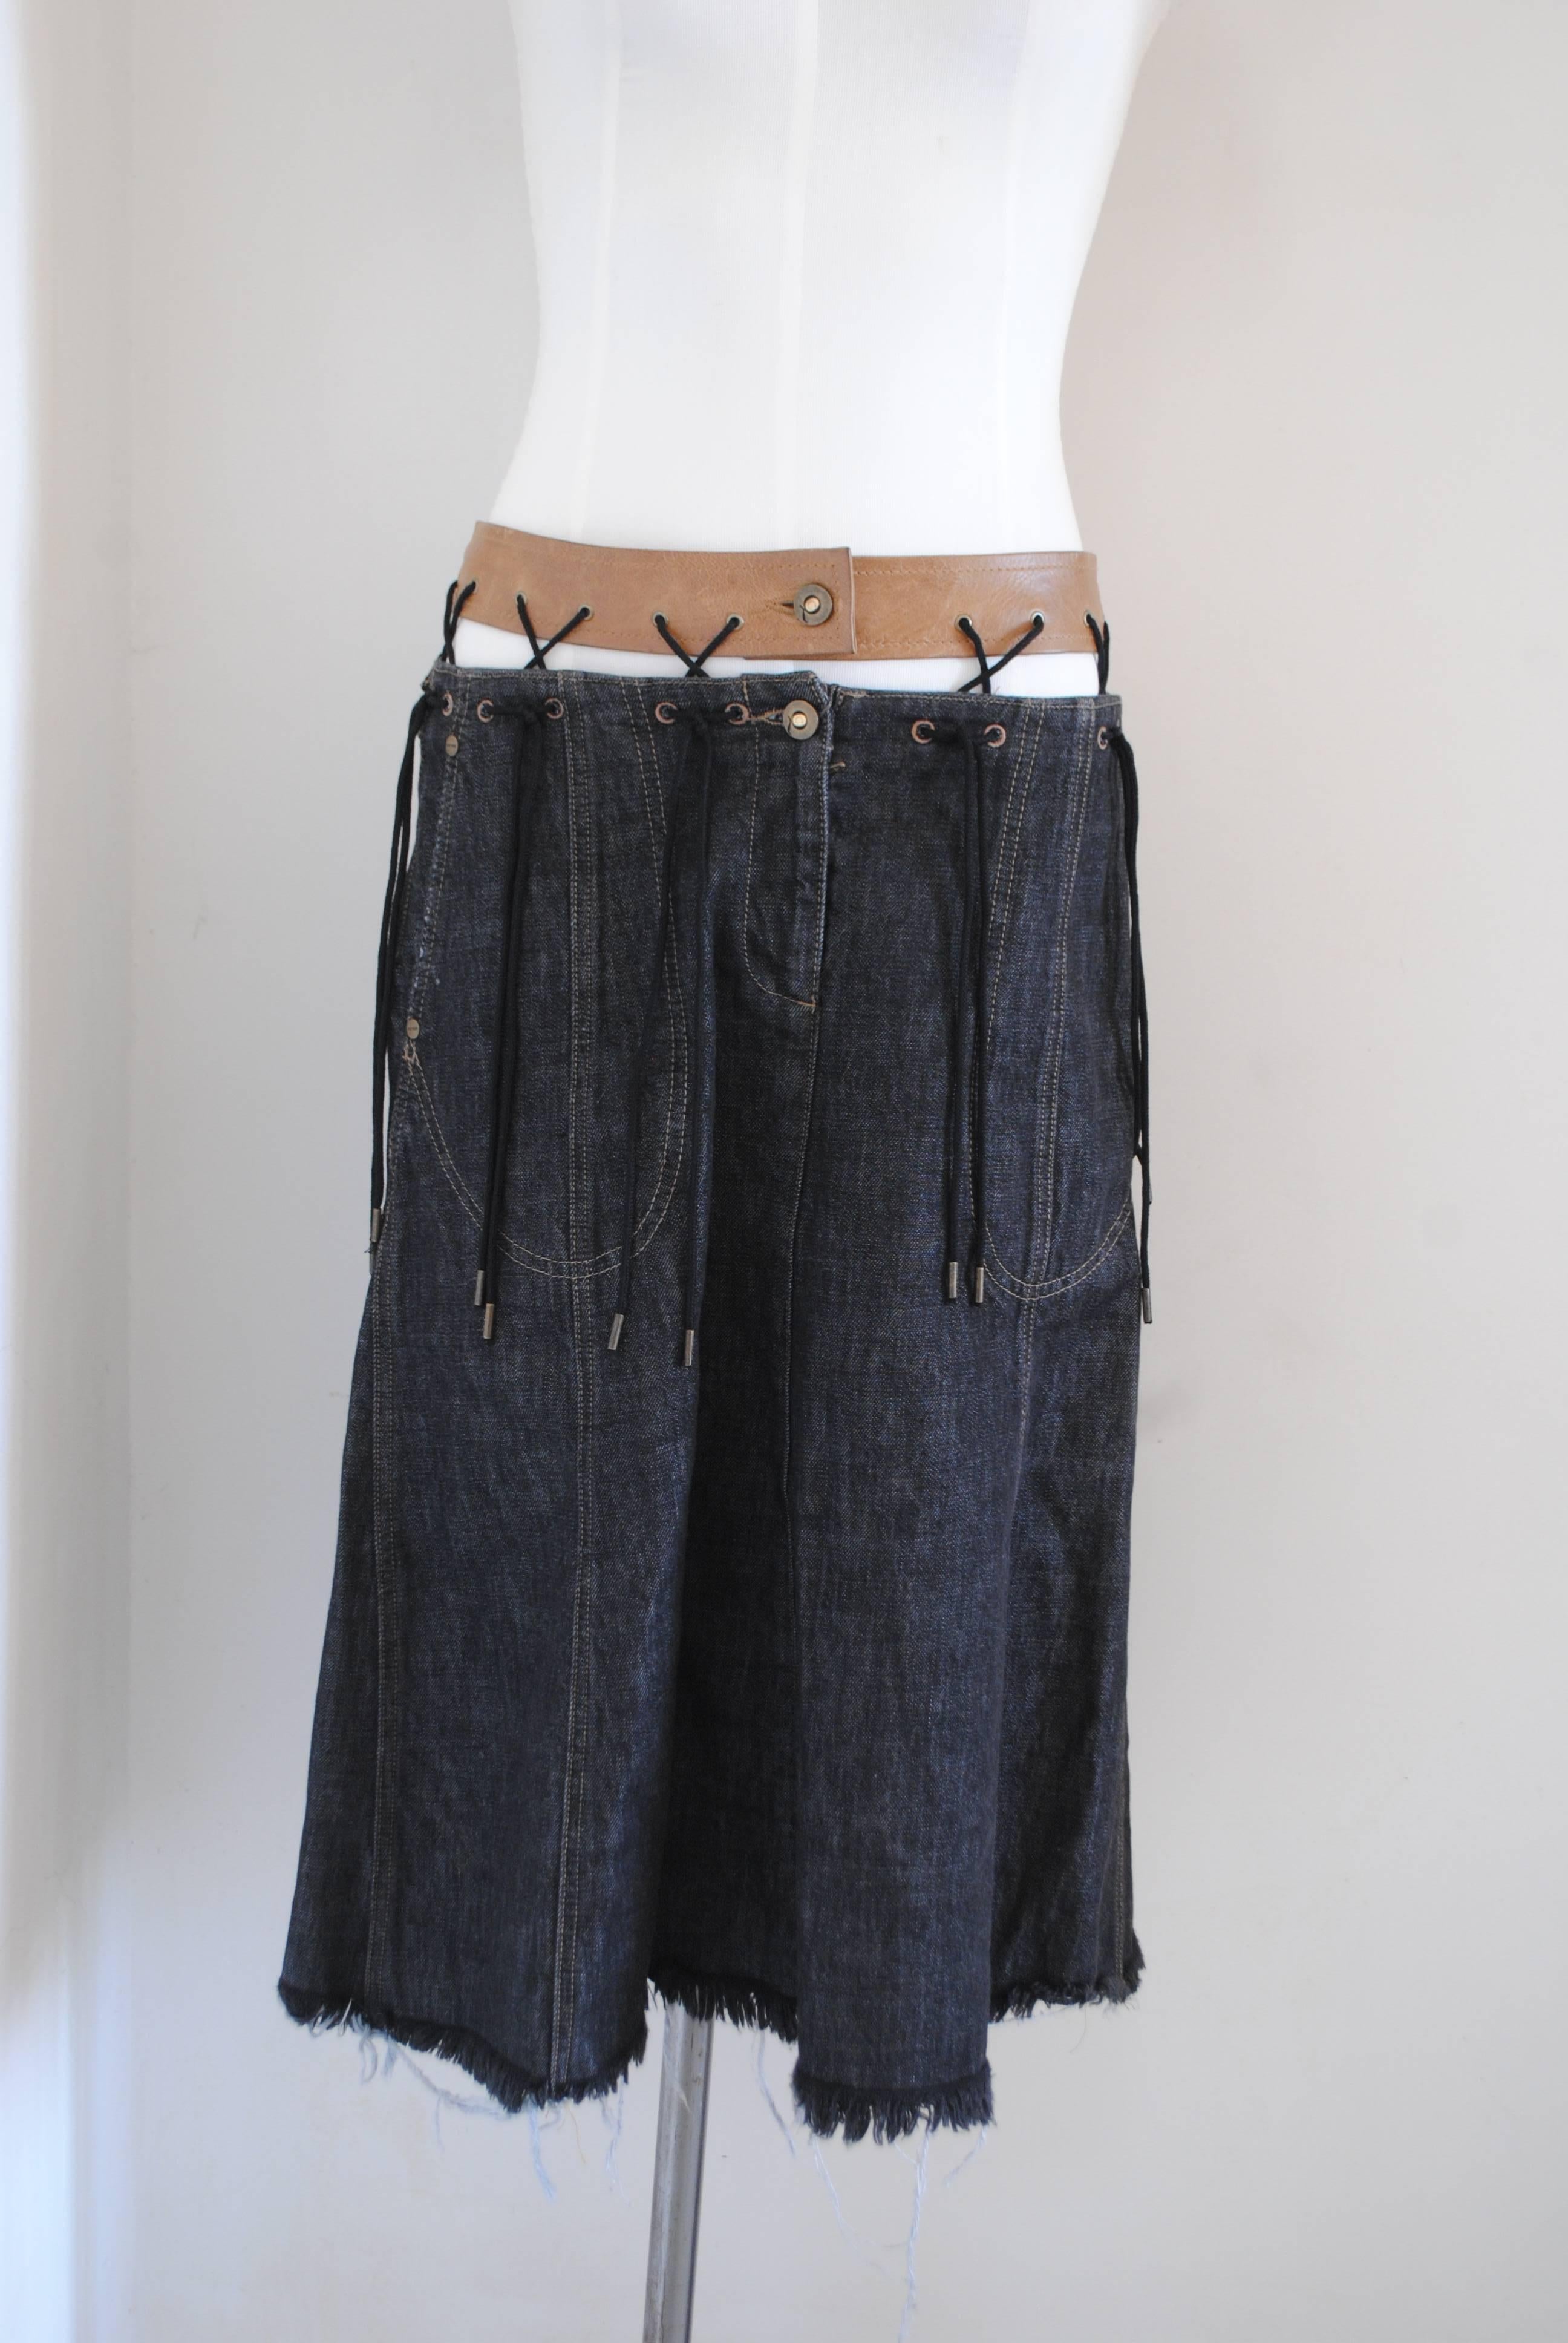 McQ by Alexander McQueen Denim long skirt
brown leather belt
Long black fringes
Totally made in italy in italian size range M
Composition Cotton